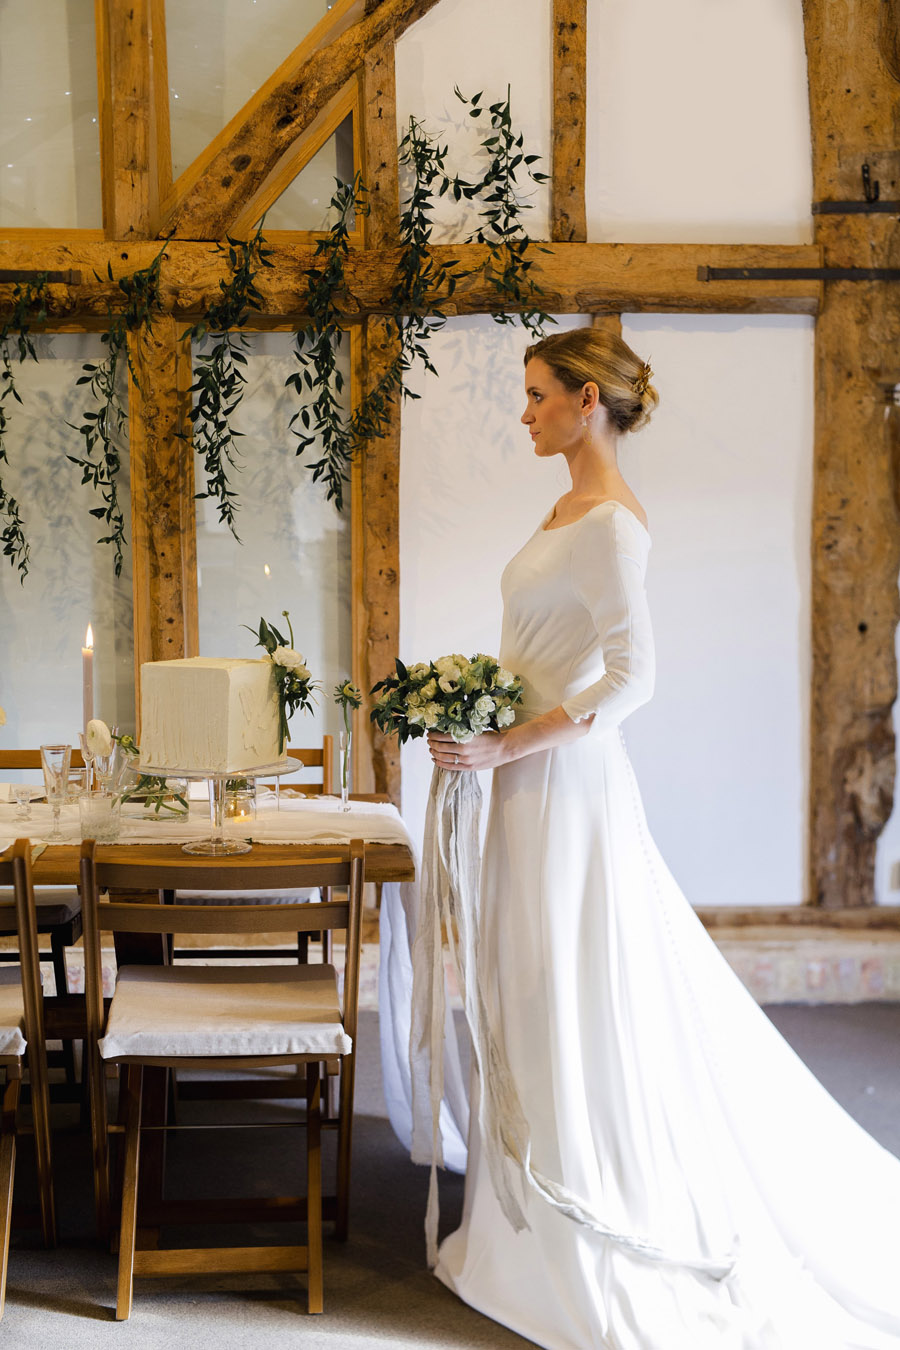 Sustainable, vegan and organic wedding styling ideas from the UK (15)